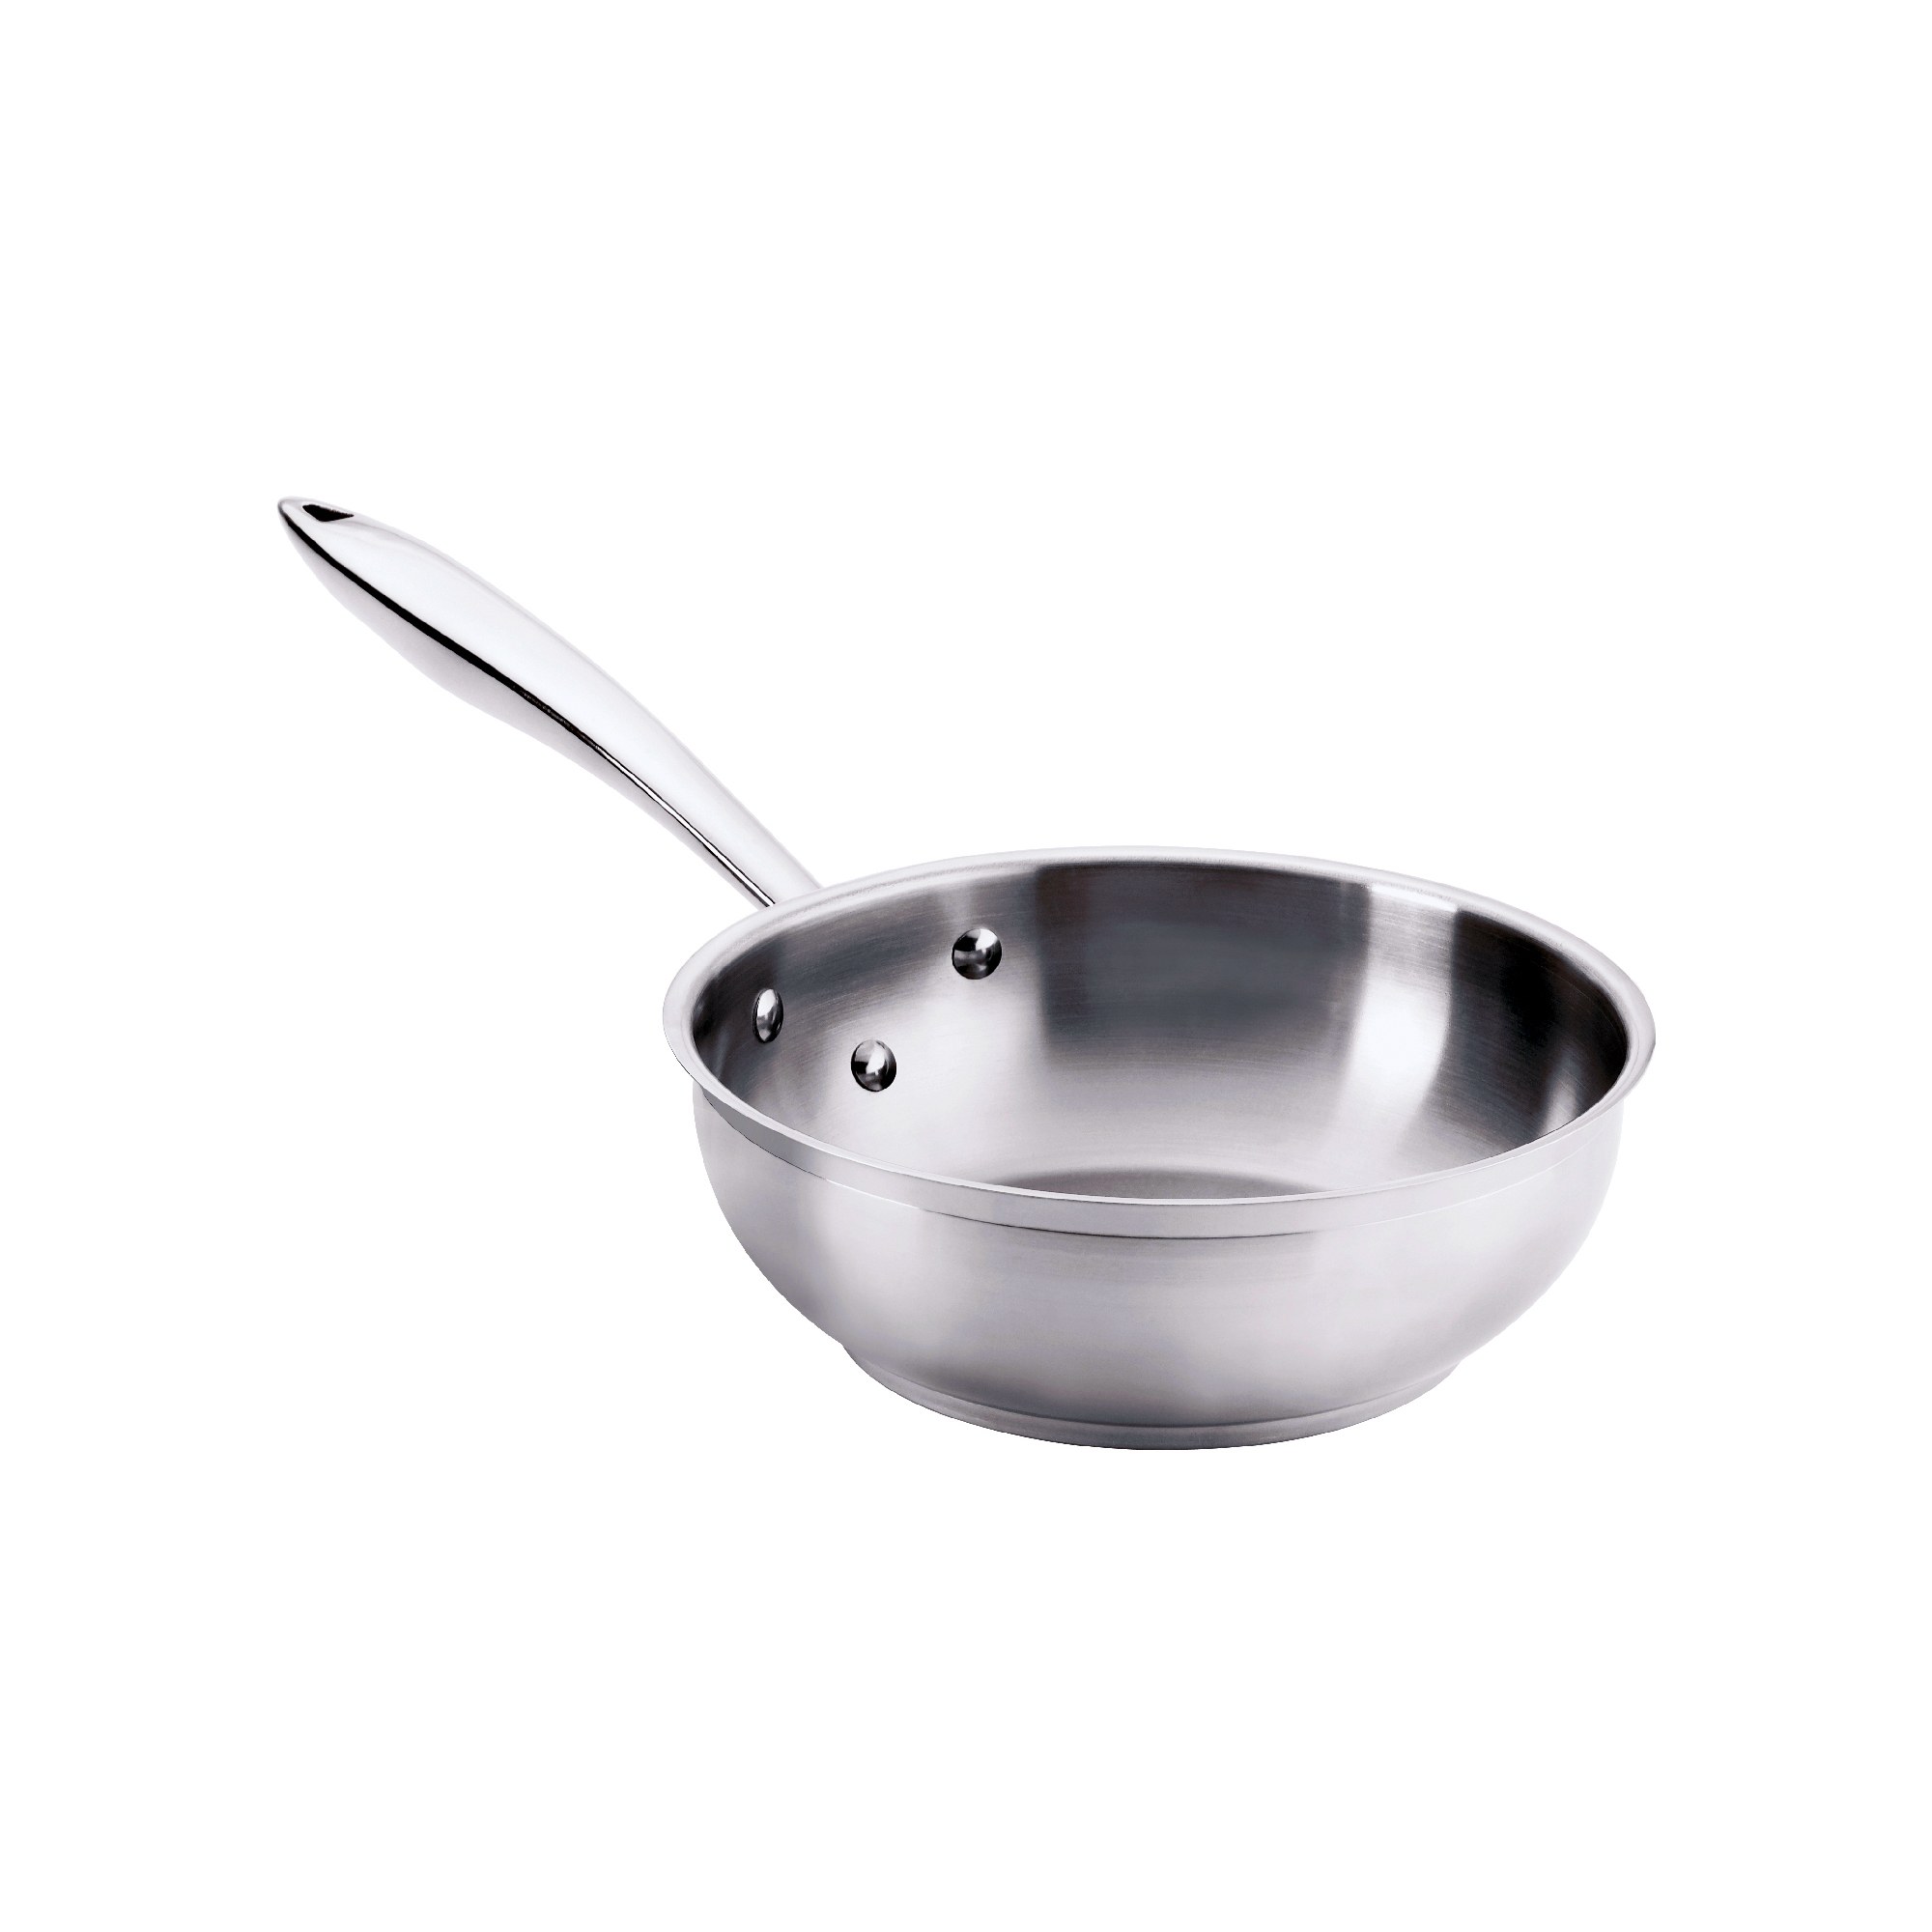 Thermalloy Stainless Steel Saute Pan 1.2 QT - 5724041 (5724116)